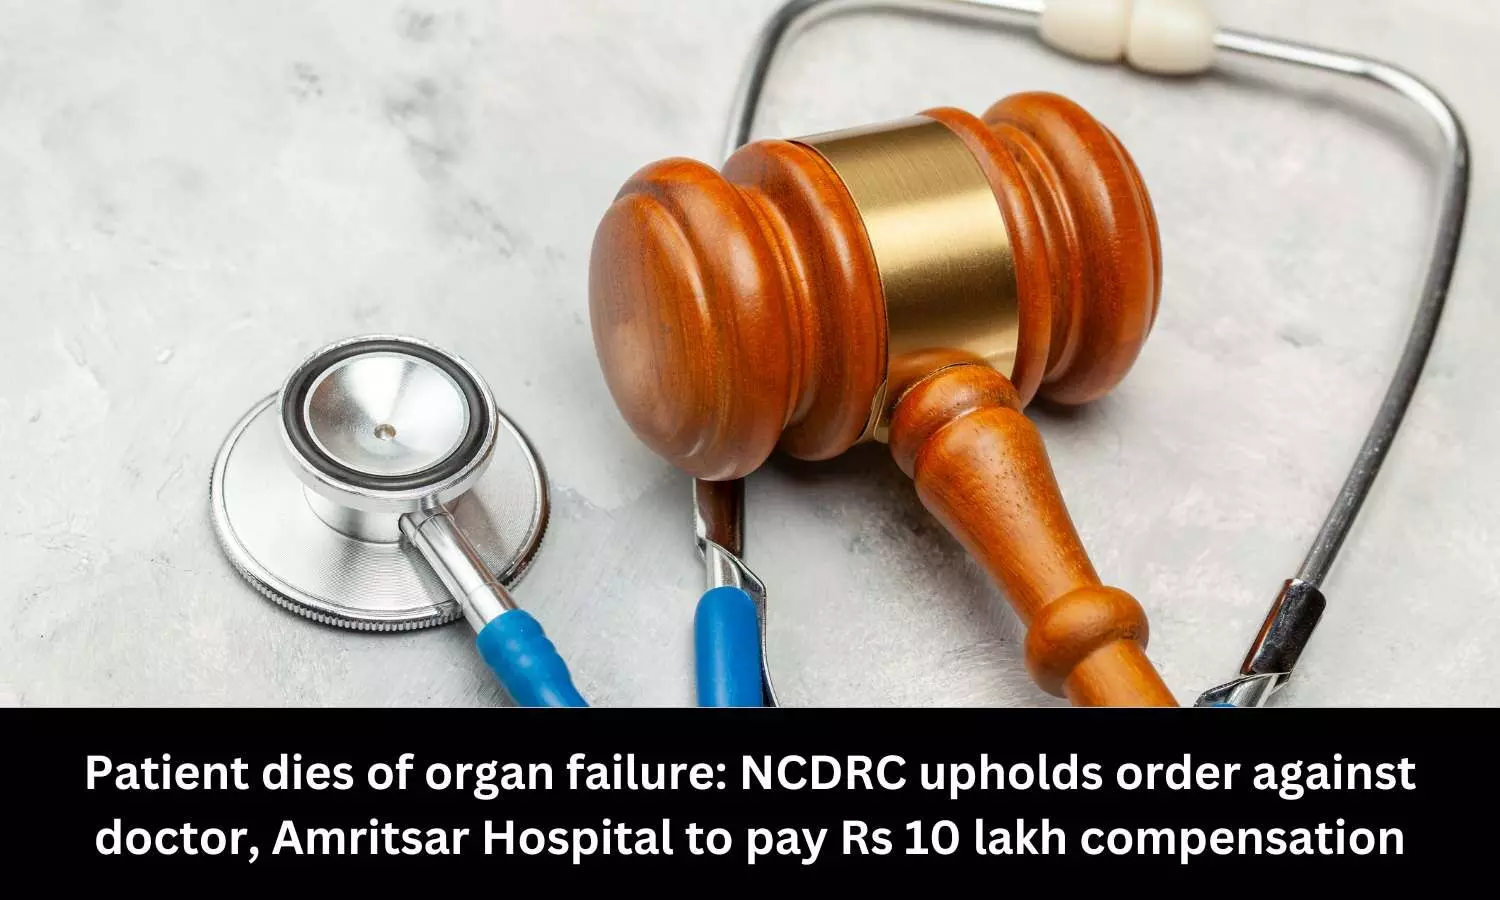 Patient dies of organ failure: NCDRC upholds order against doctor, Amritsar Hospital to pay Rs 10 lakh compensation